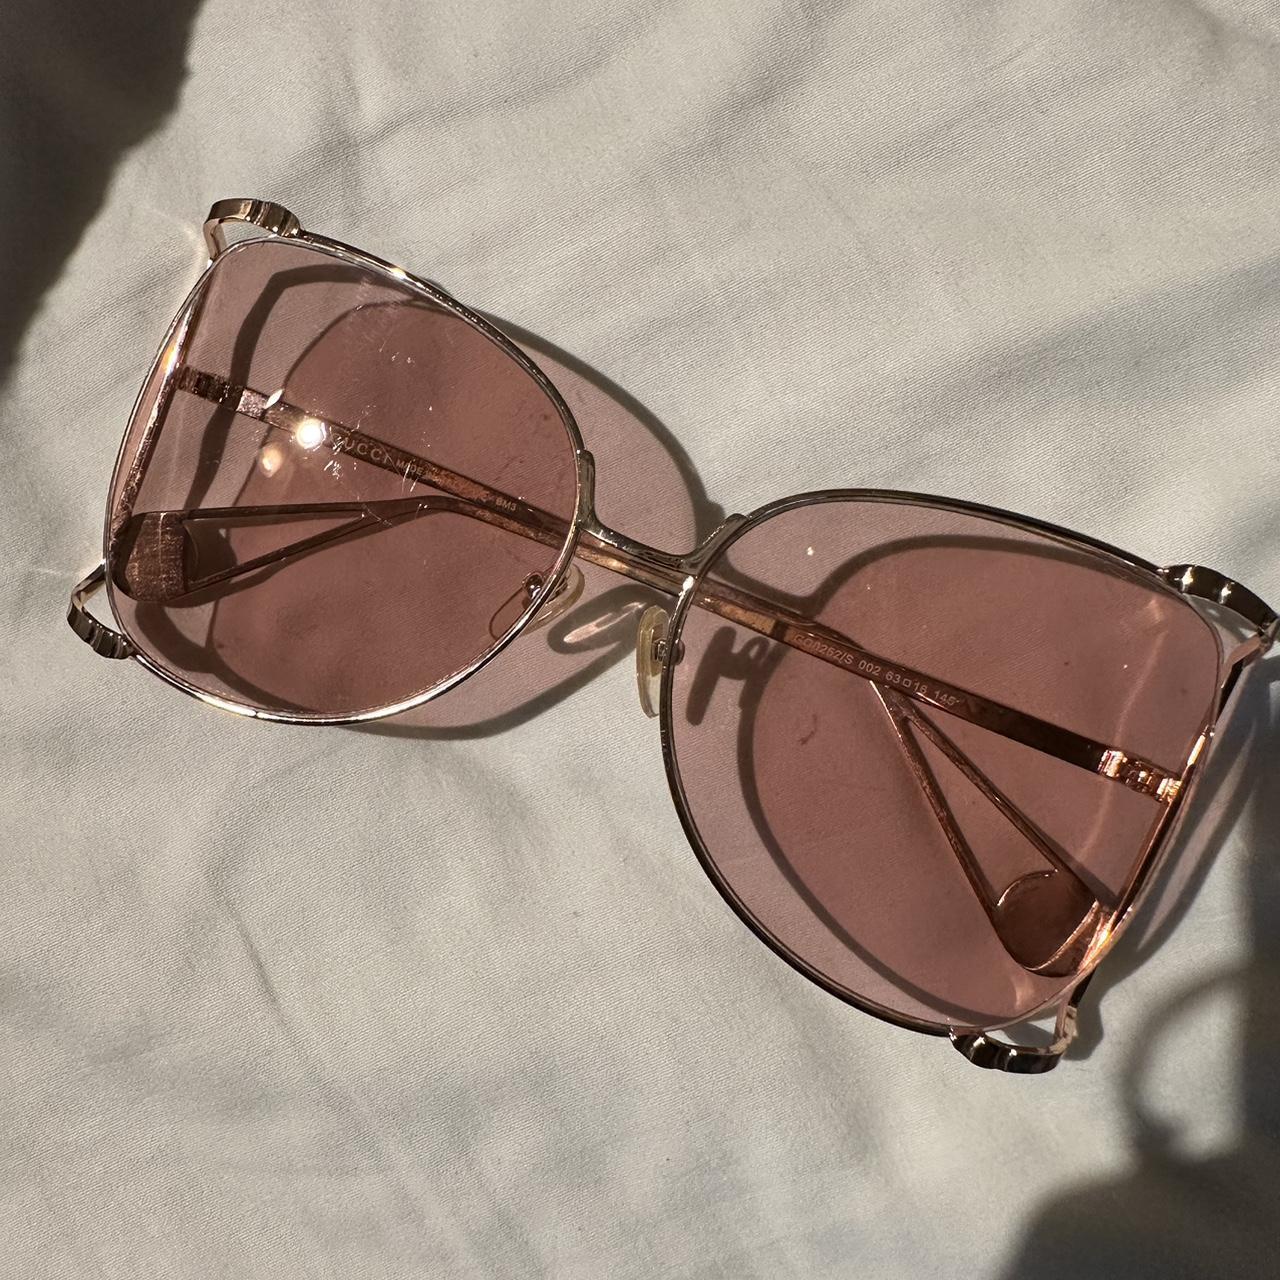 Gucci Women's Pink and Gold Sunglasses (3)